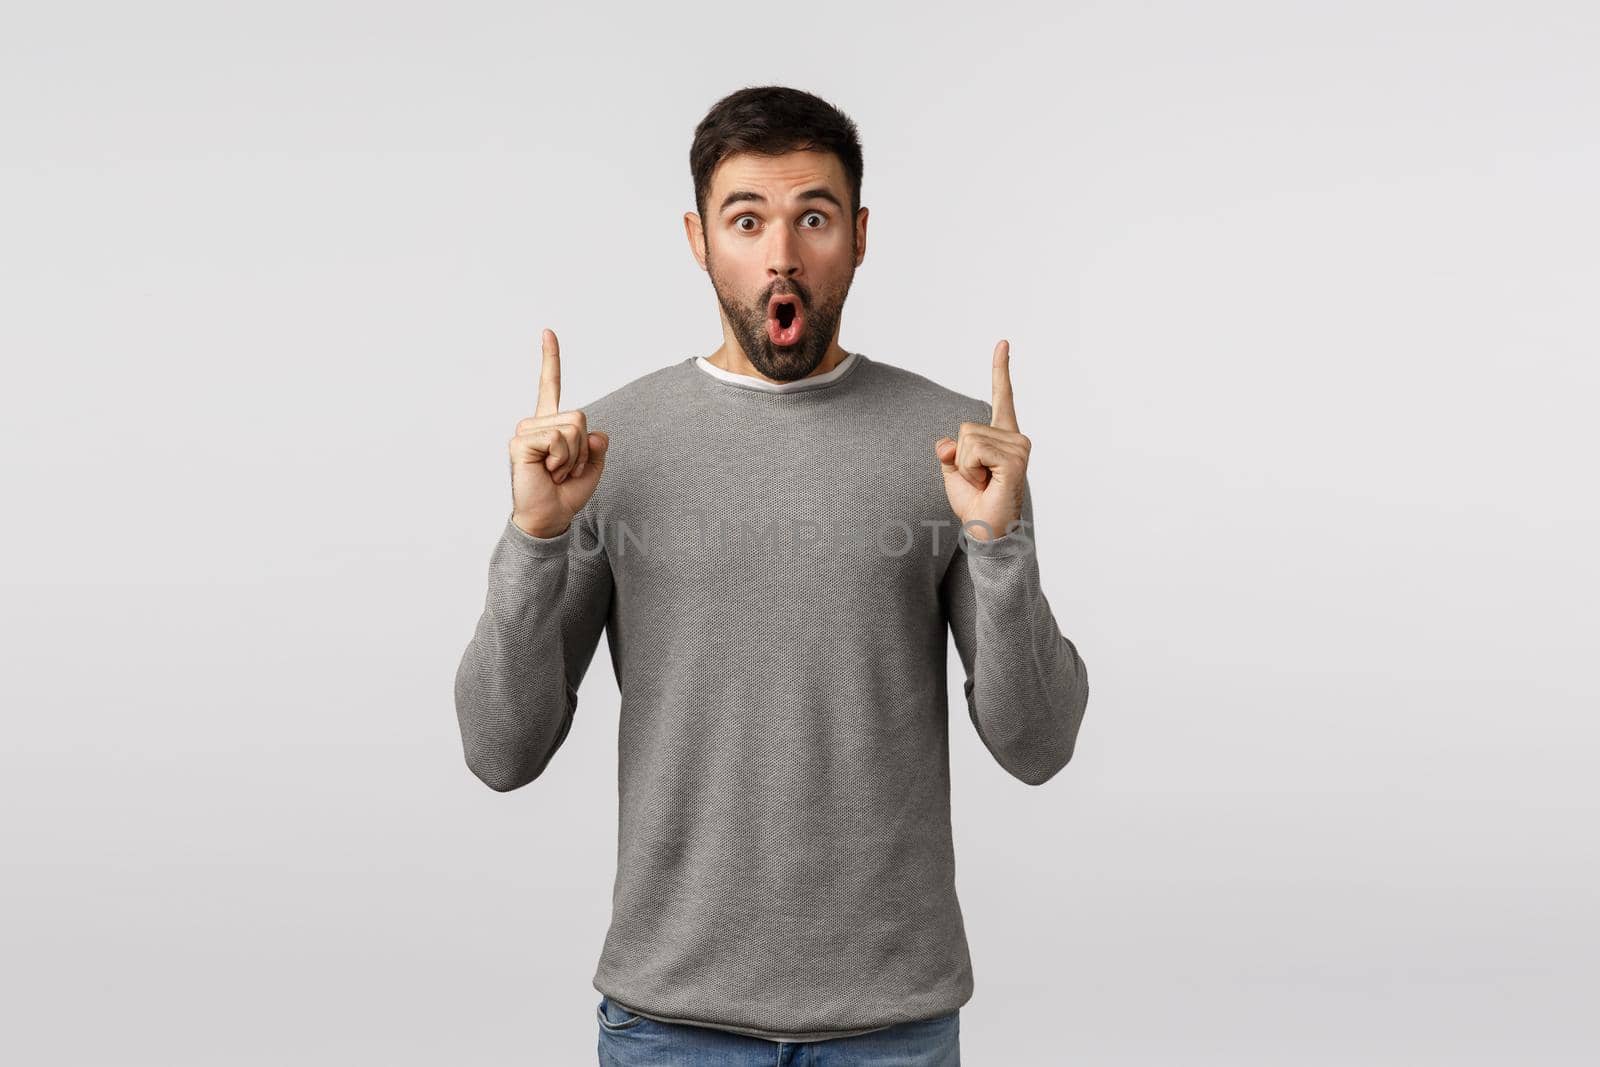 Surprised and amazed, speechless excited handsome bearded guy in grey sweater, say wow, folding lips amused, gasping astonished, pointing fingers up to turn attention, discuss impressive offer.